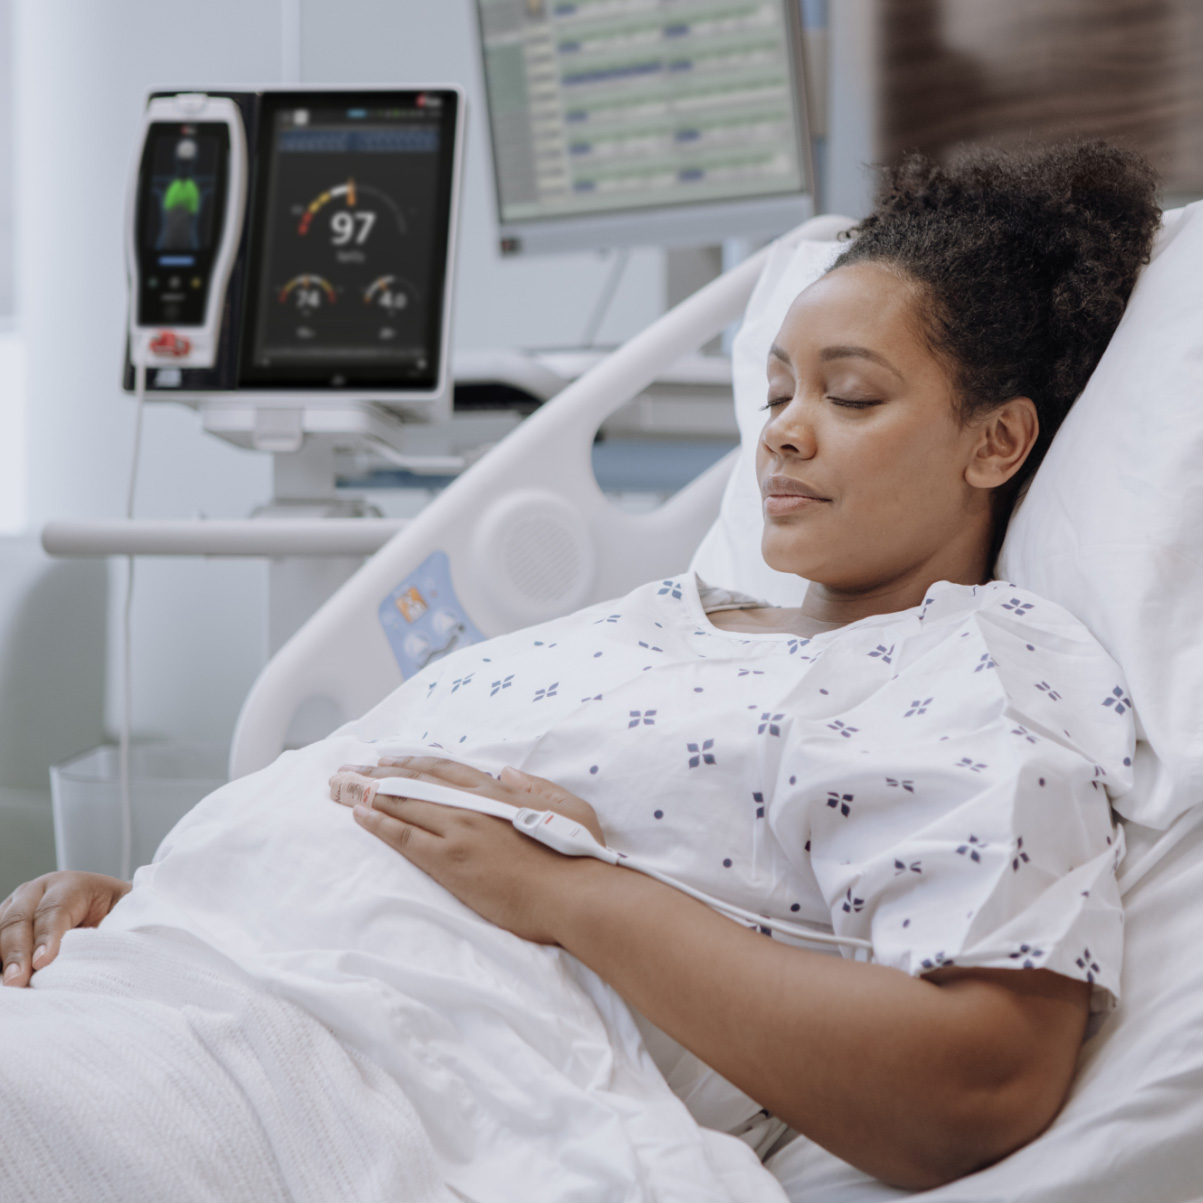 Dark-skinned patient in hospital bed being monitored with a Masimo RD SET pulse oximetry sensor and Radical-7 pulse oximeter docked in a Root device.